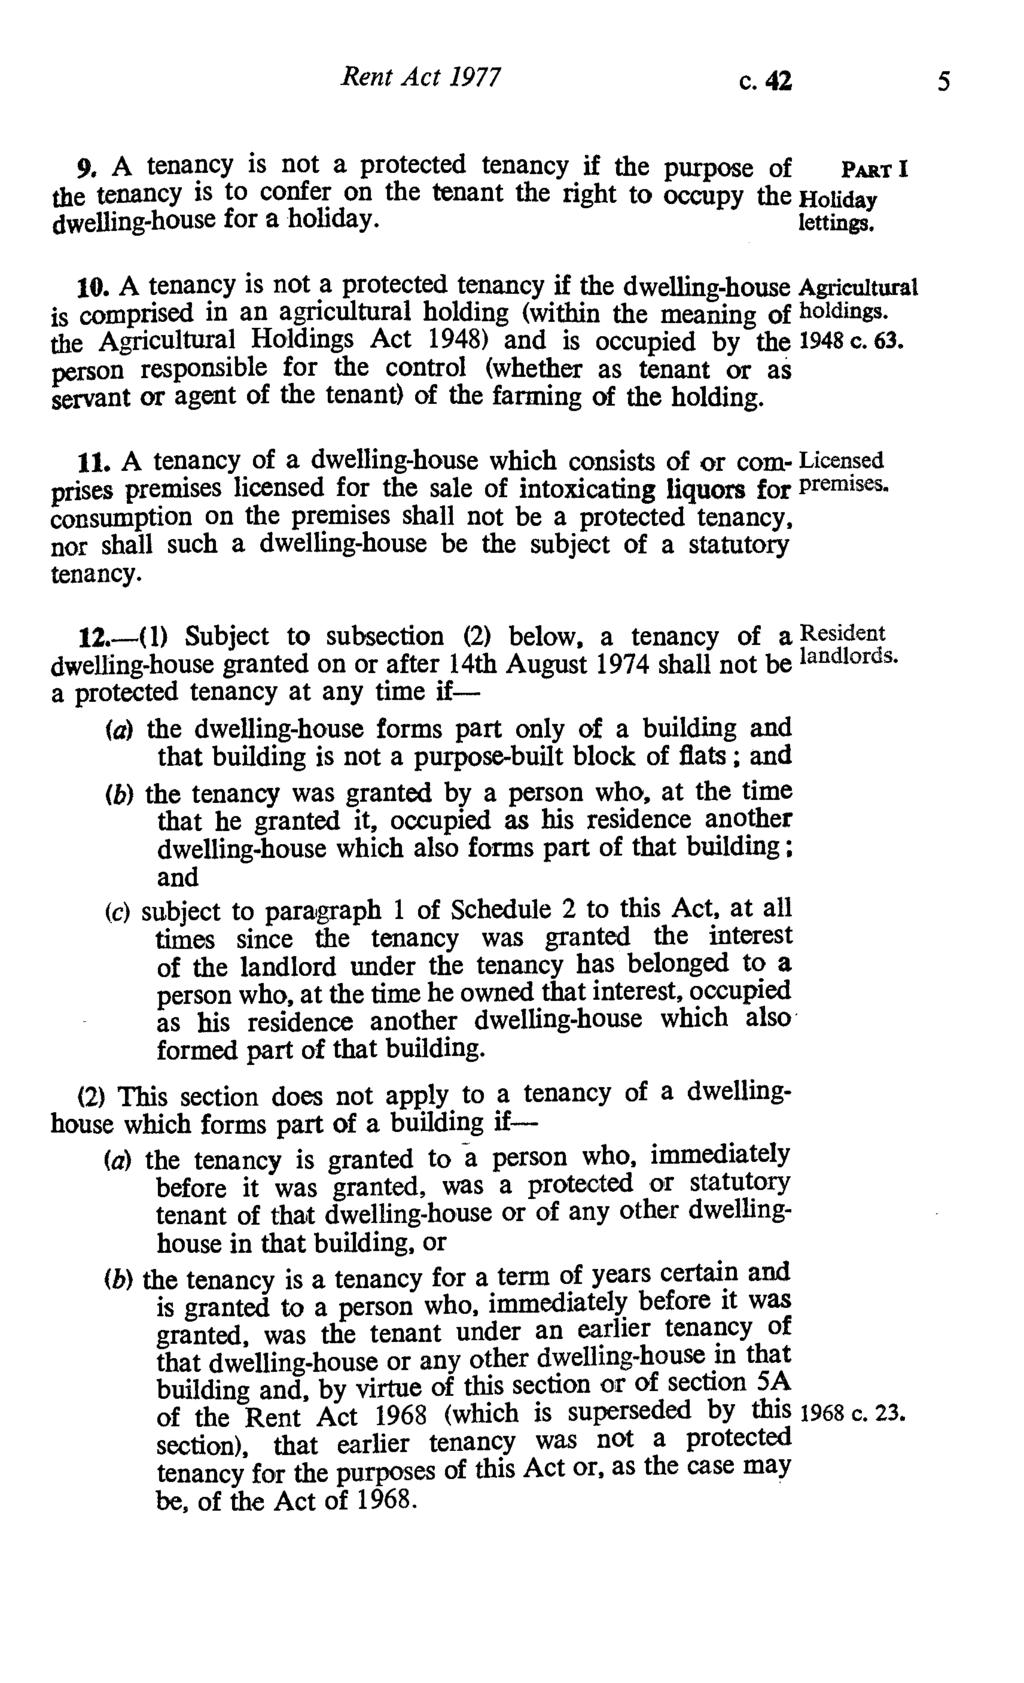 Rent Act 1977 c. 42 5 9. A tenancy is not a protected tenancy if the purpose of PART I the tenancy is to confer on the tenant the right to occupy the Holiday dwelling-house for a holiday. settings.